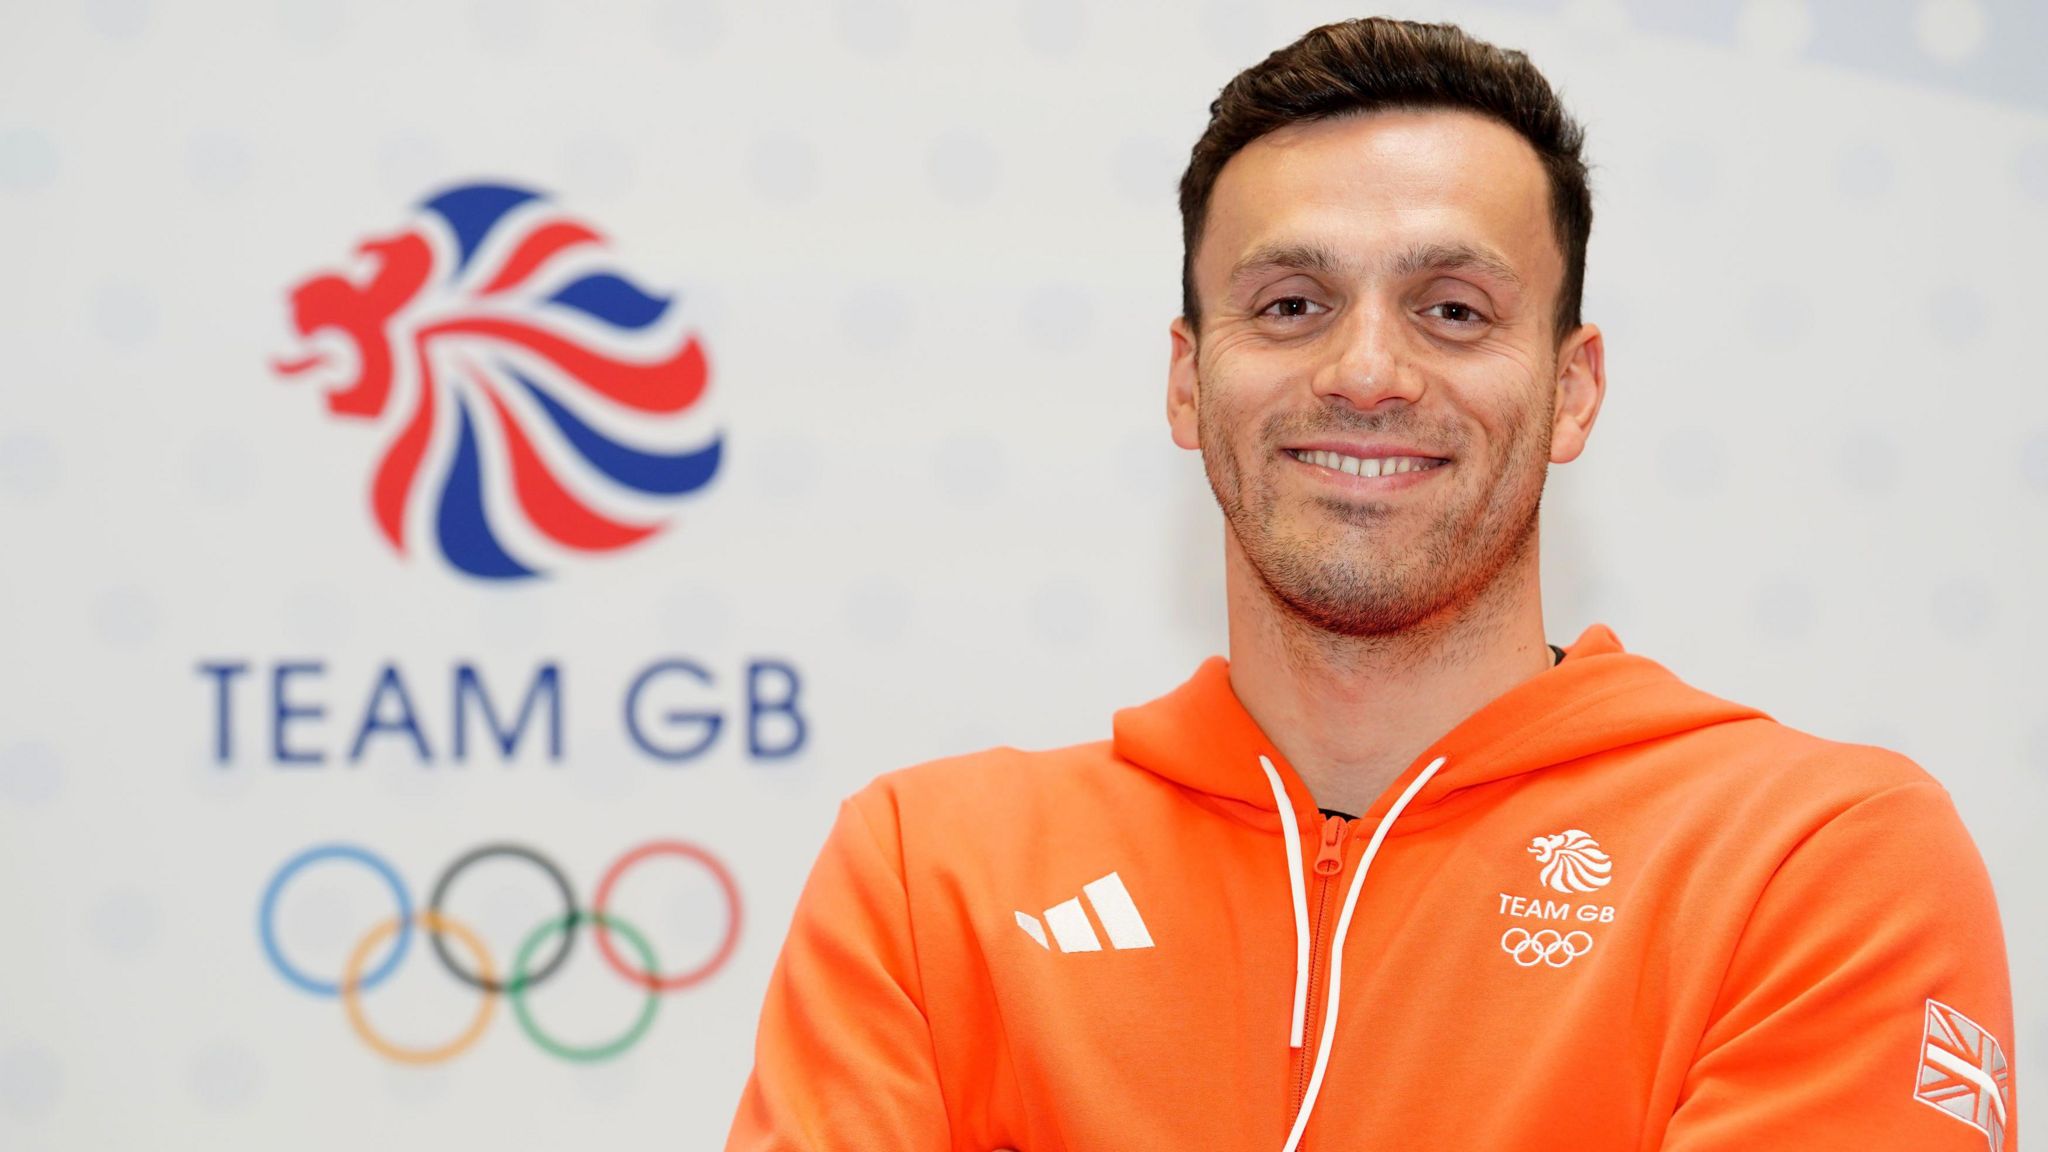 Image of James Guy MBE. He is pictured in front of an Olympic ring sign, with Team GB printed above it. He is wearing an orange hoodie with Team GB logos.